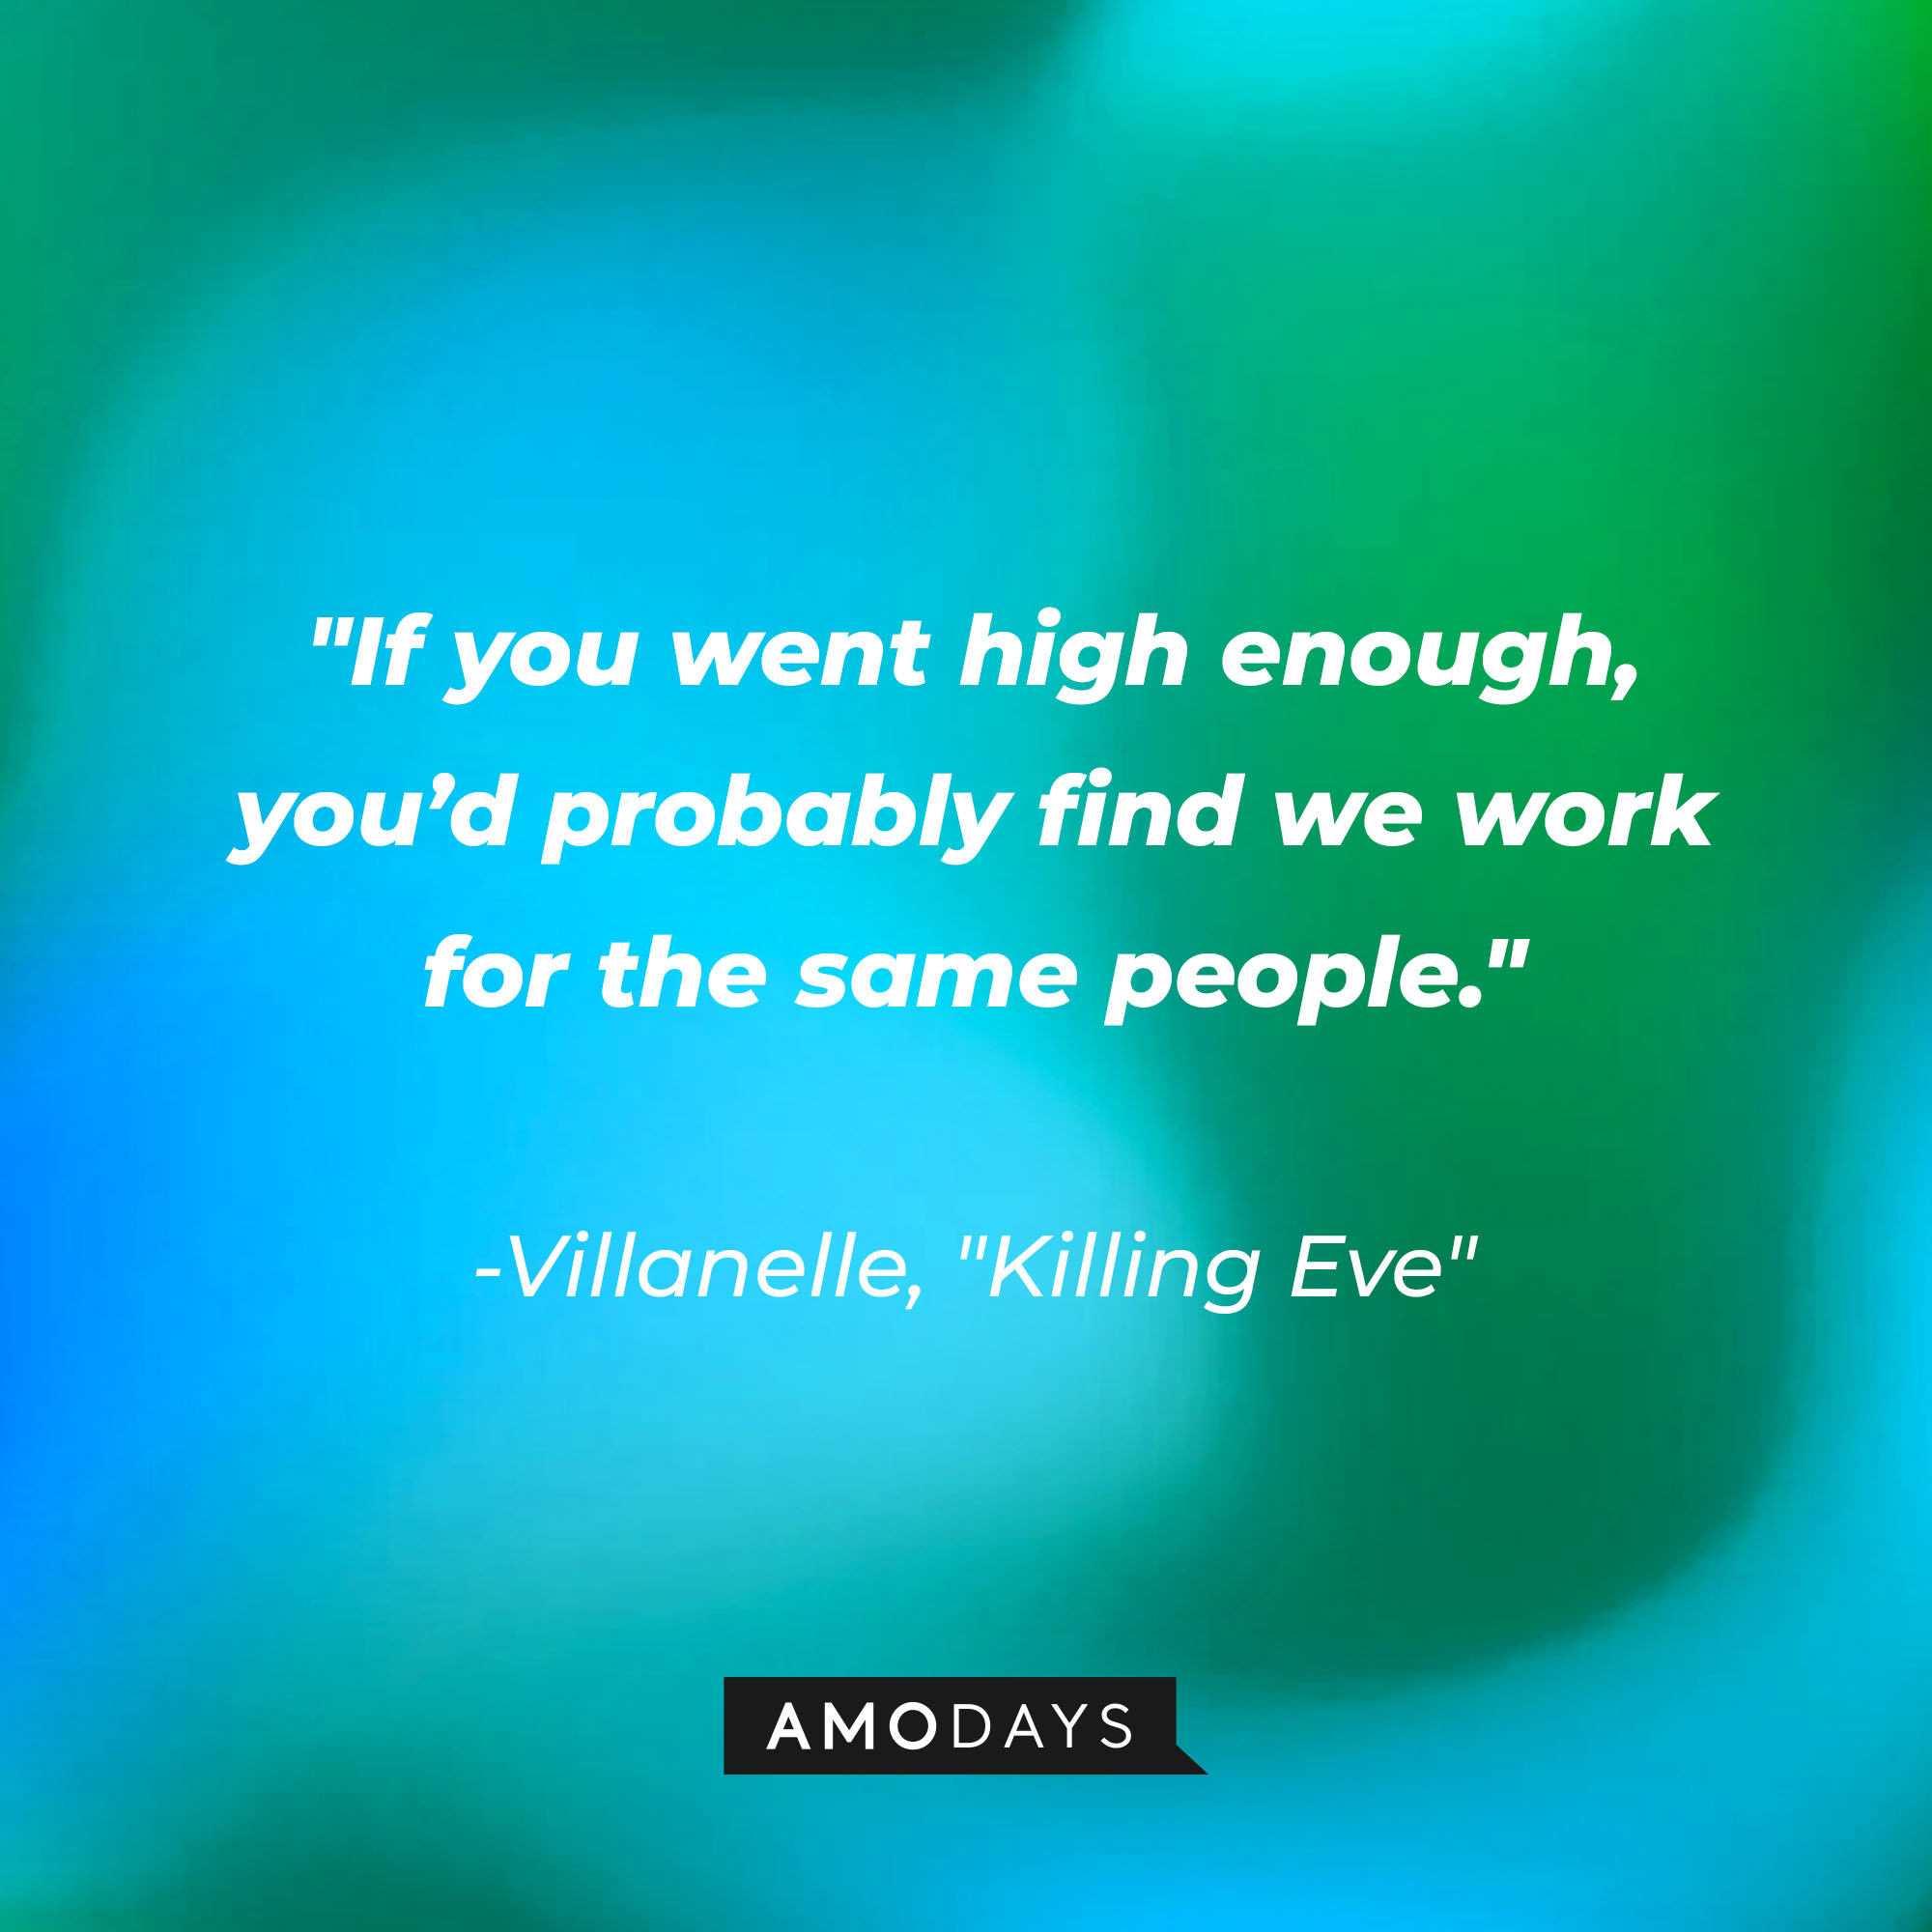 Villanelle's quote: "If you went high enough, you’d probably find we work for the same people." | Source: Amodays